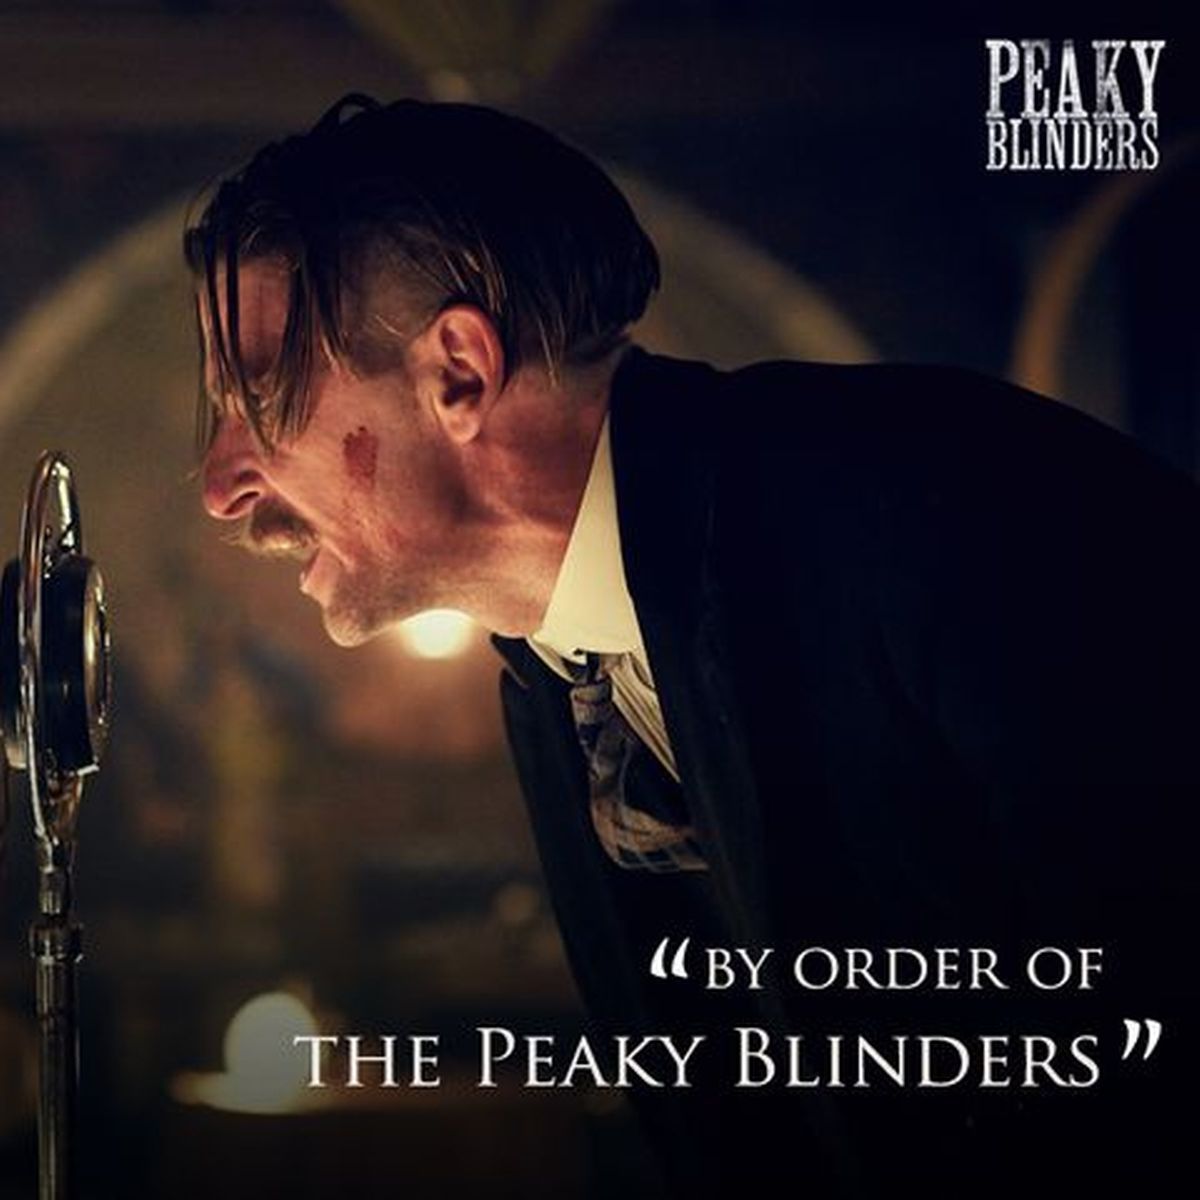 Peaky blinders  Peaky blinders poster Peaky blinders tommy shelby Peaky  blinders wallpaper